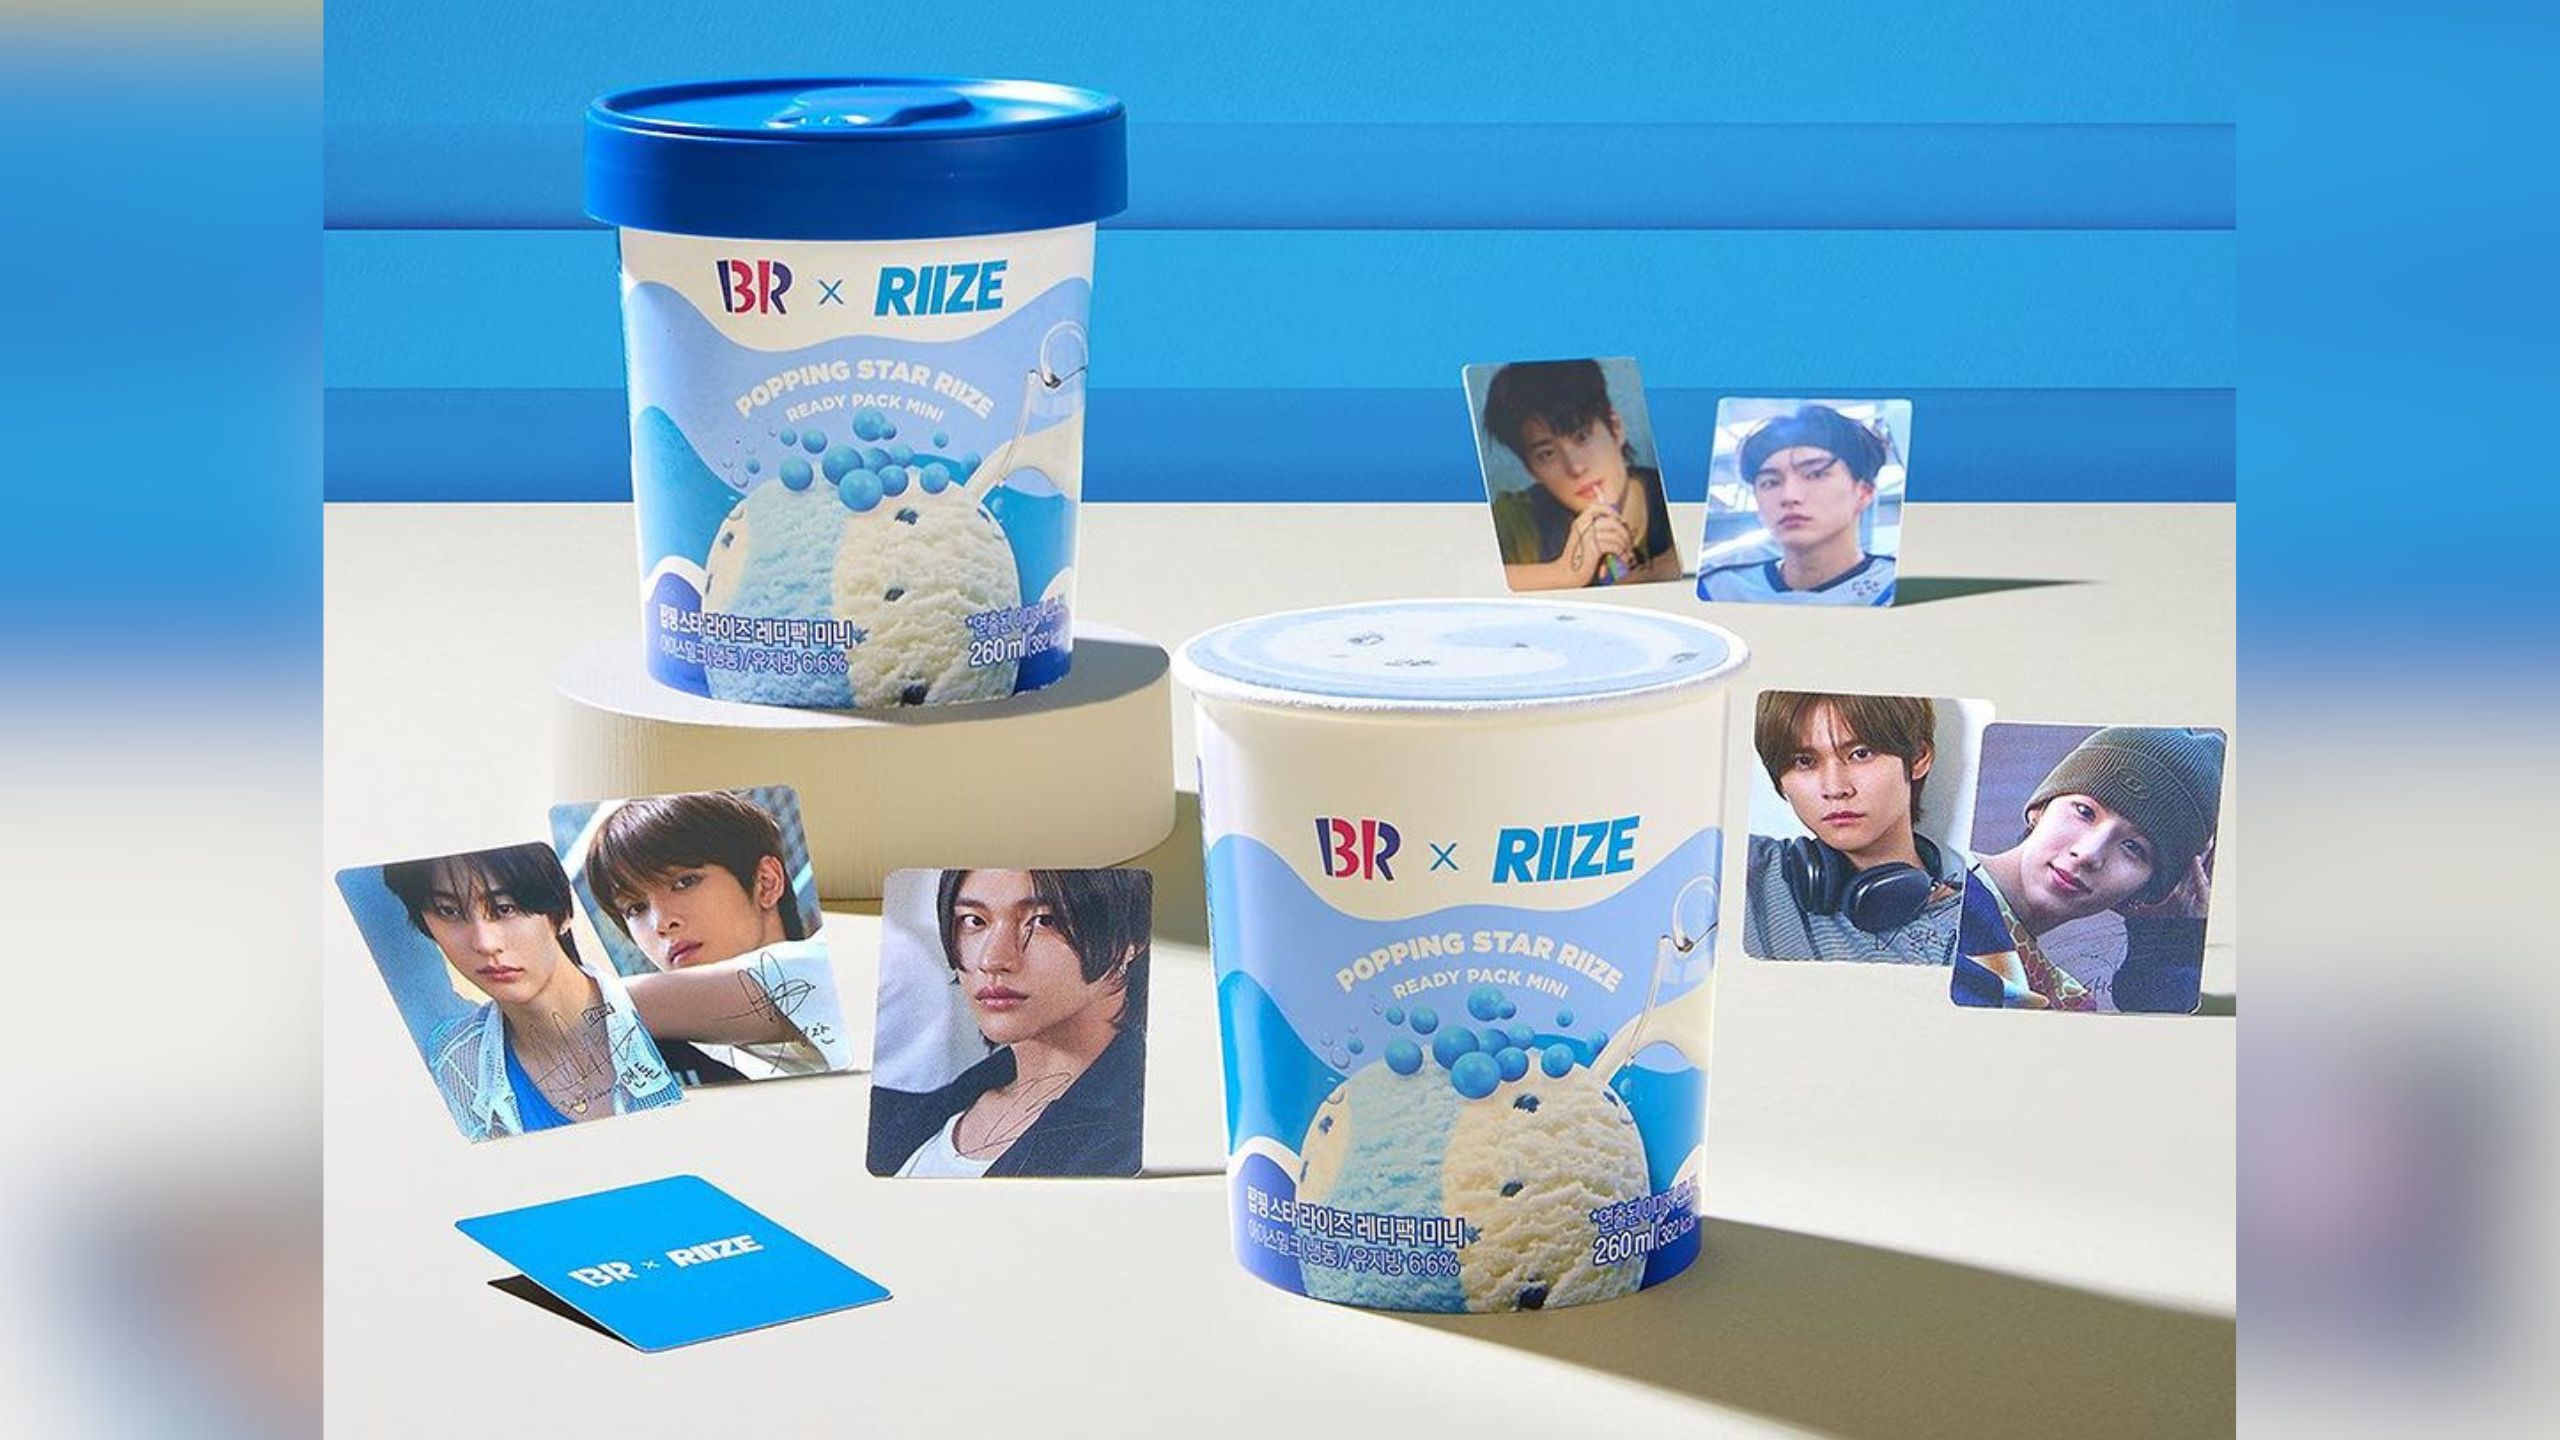 Will you buy Baskin-Robbins because BTS is the brand ambassador of